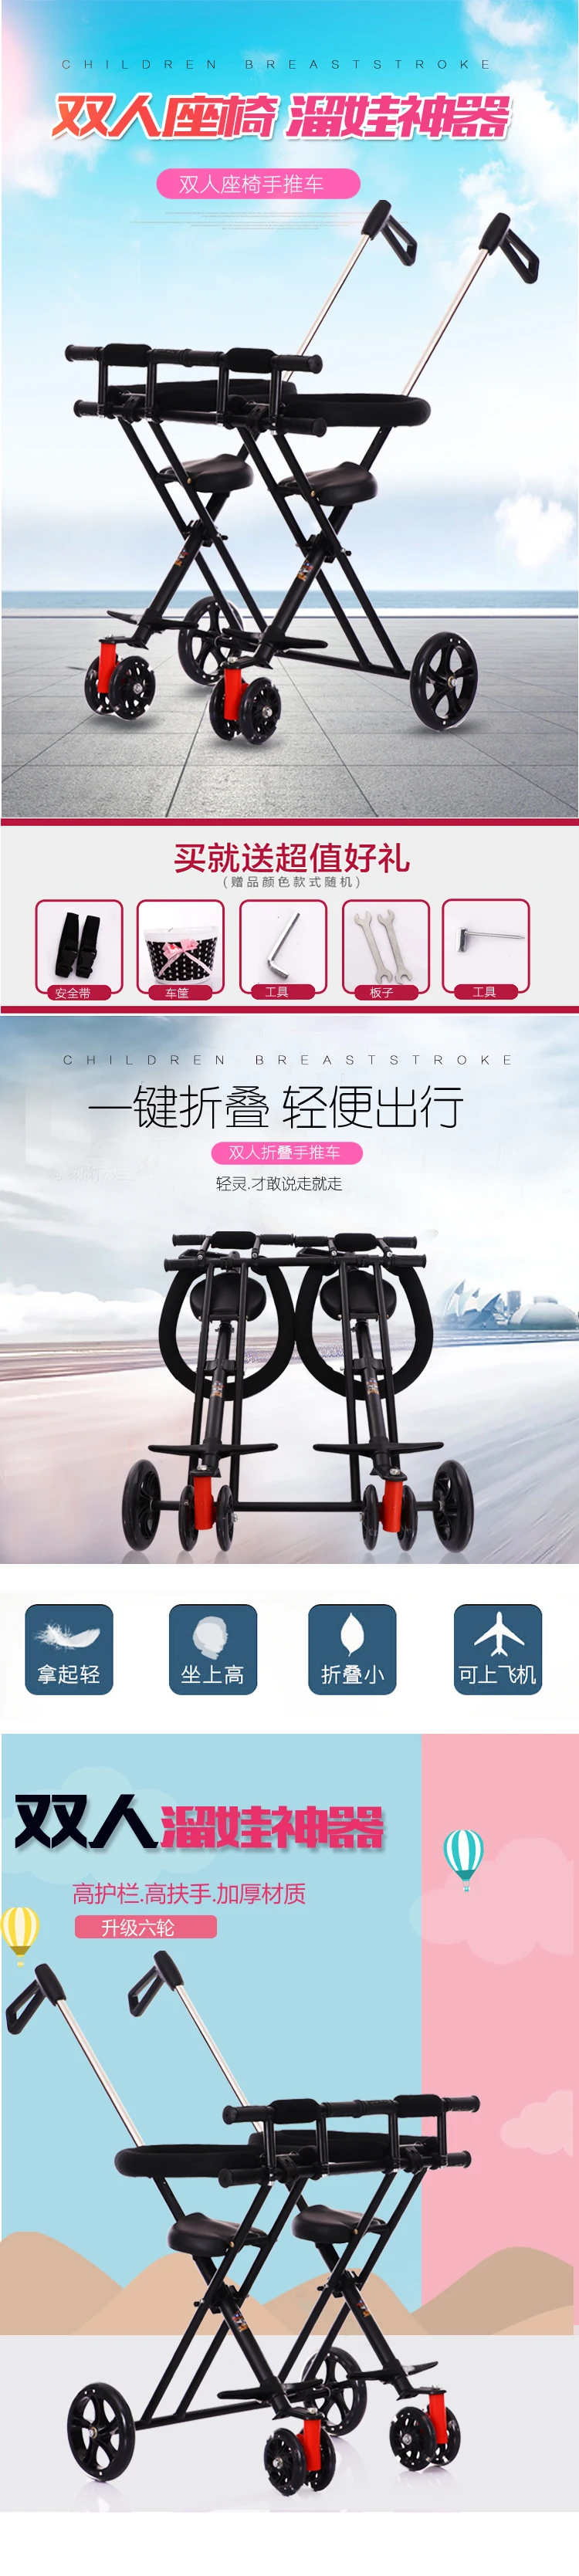 Light Weight Twin Baby Stroller Big Wheel Double Seats Push Trolley Children Twin Travel Tricycle Infant Easy Fold Baby Carriage